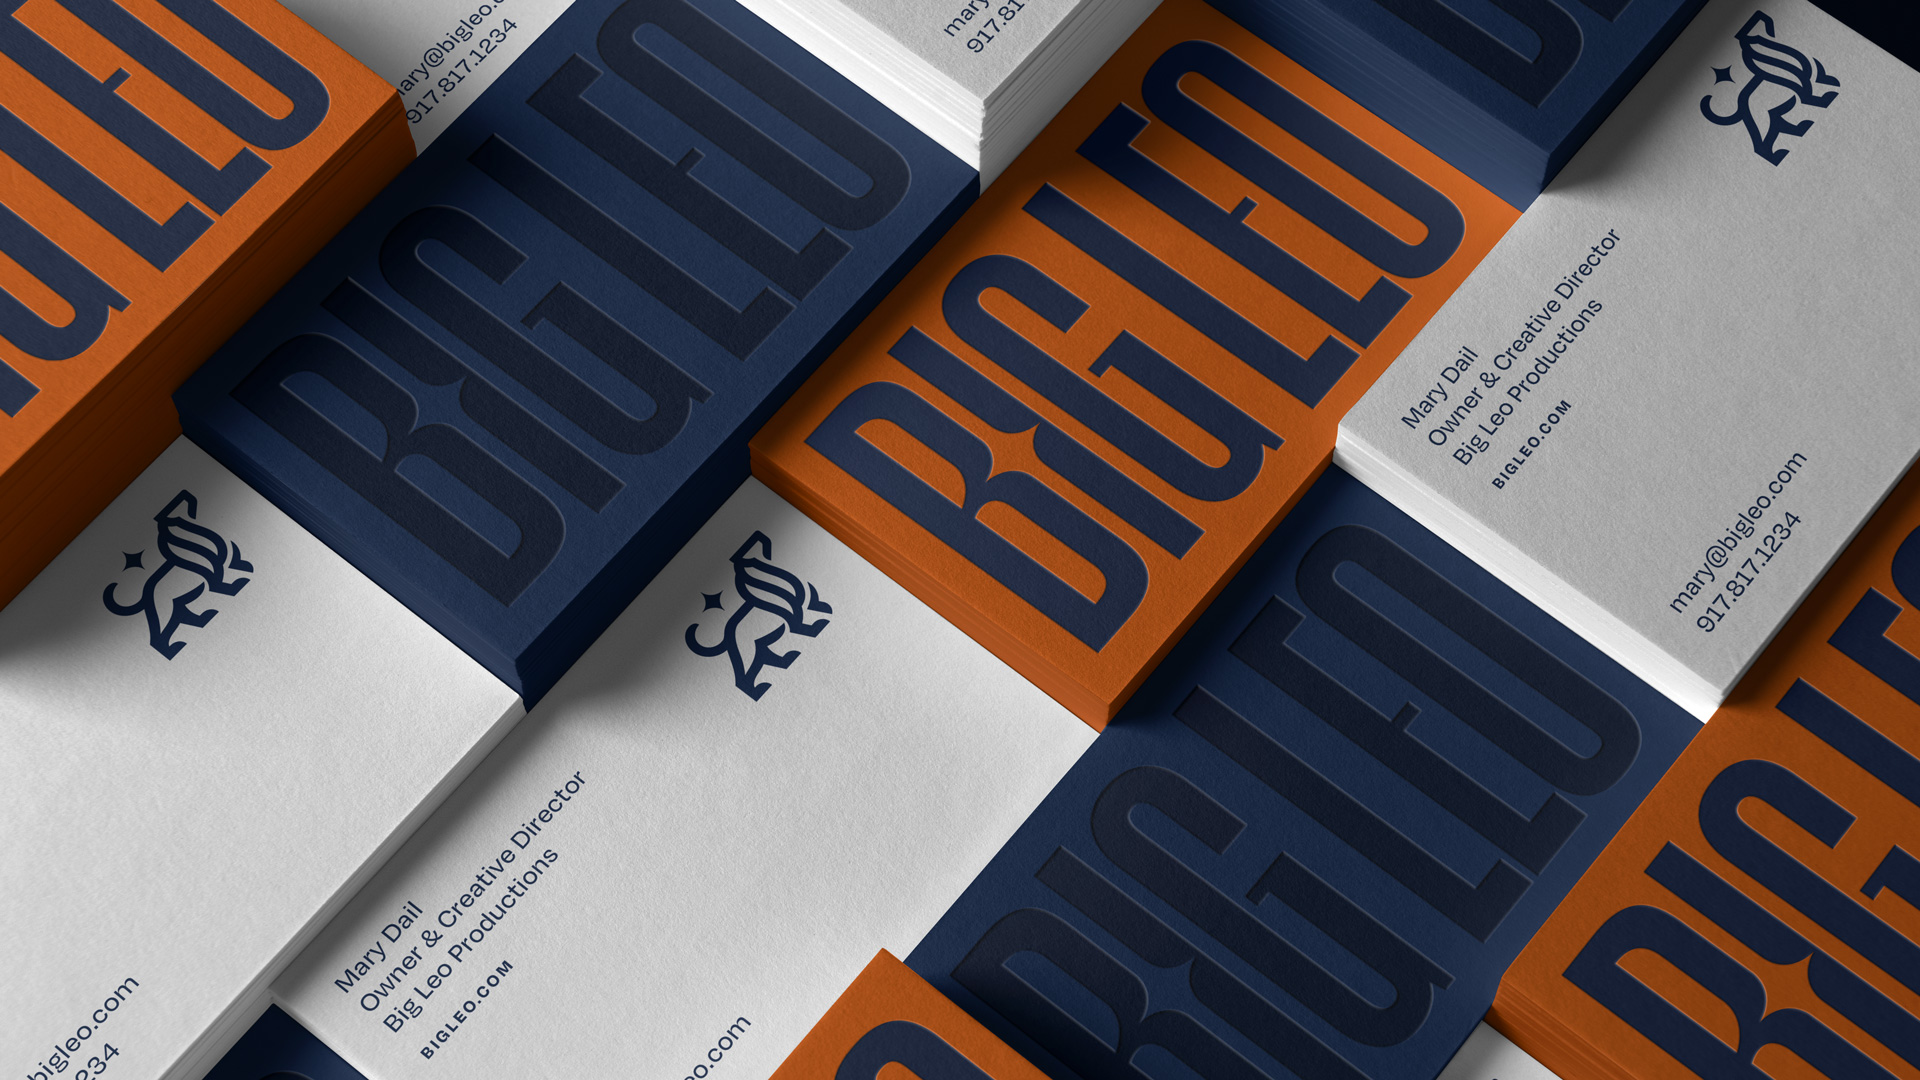 Big Leo business card grid with condensed wordmark and lion logo.